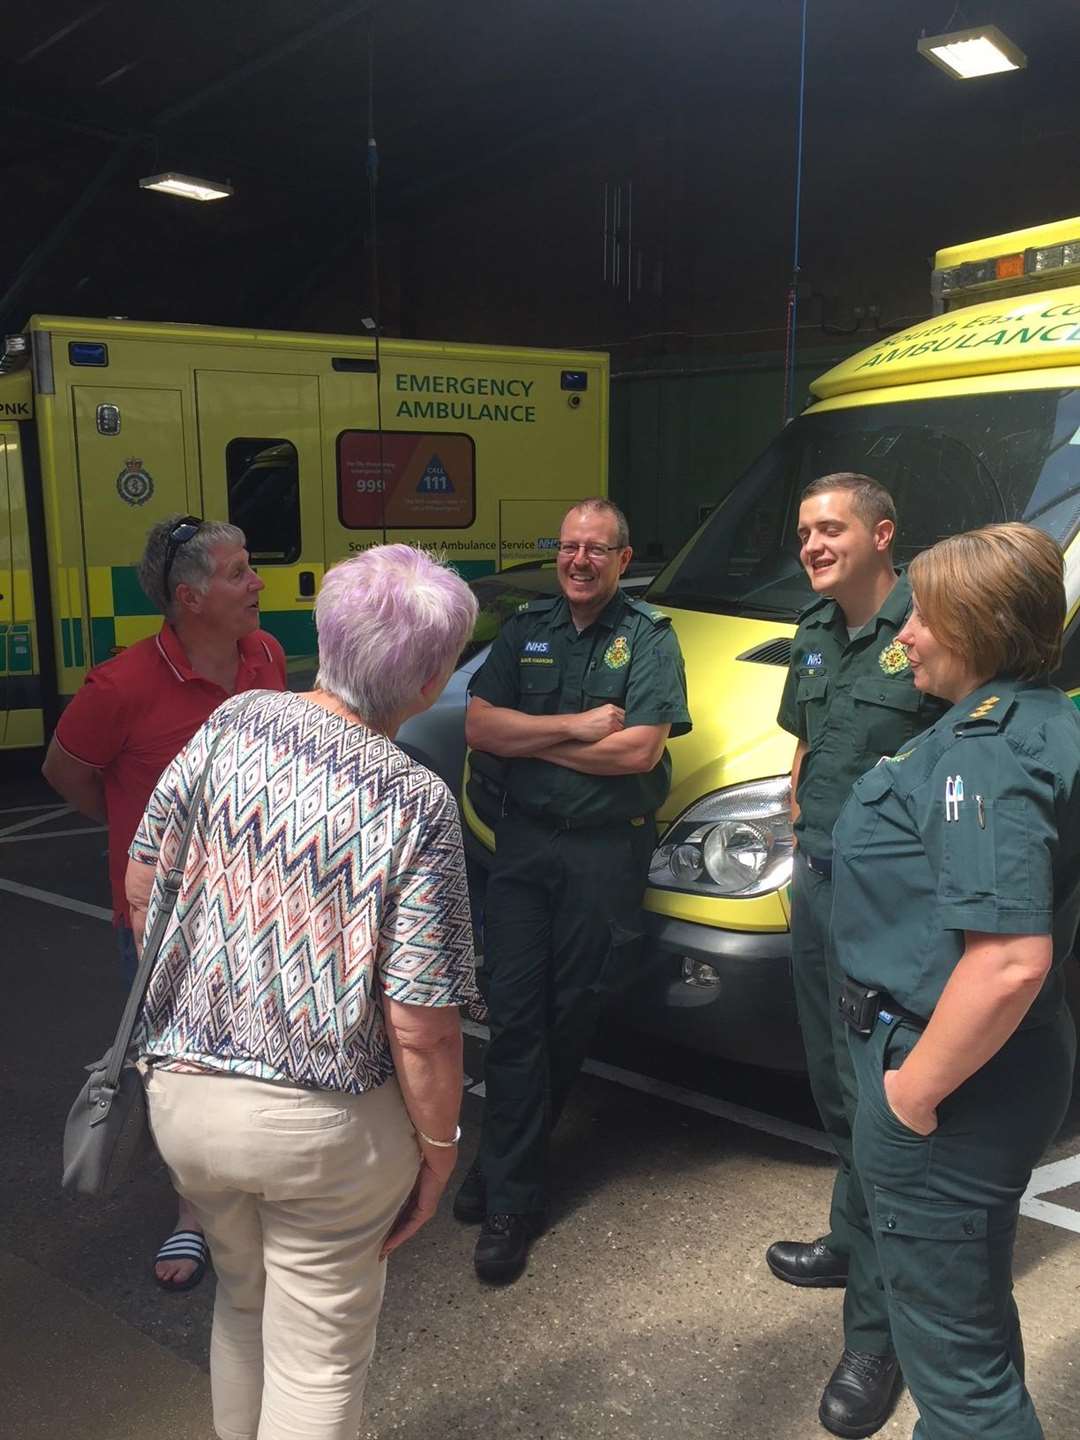 Sue and Malcom chatting with the paramedics (3084527)